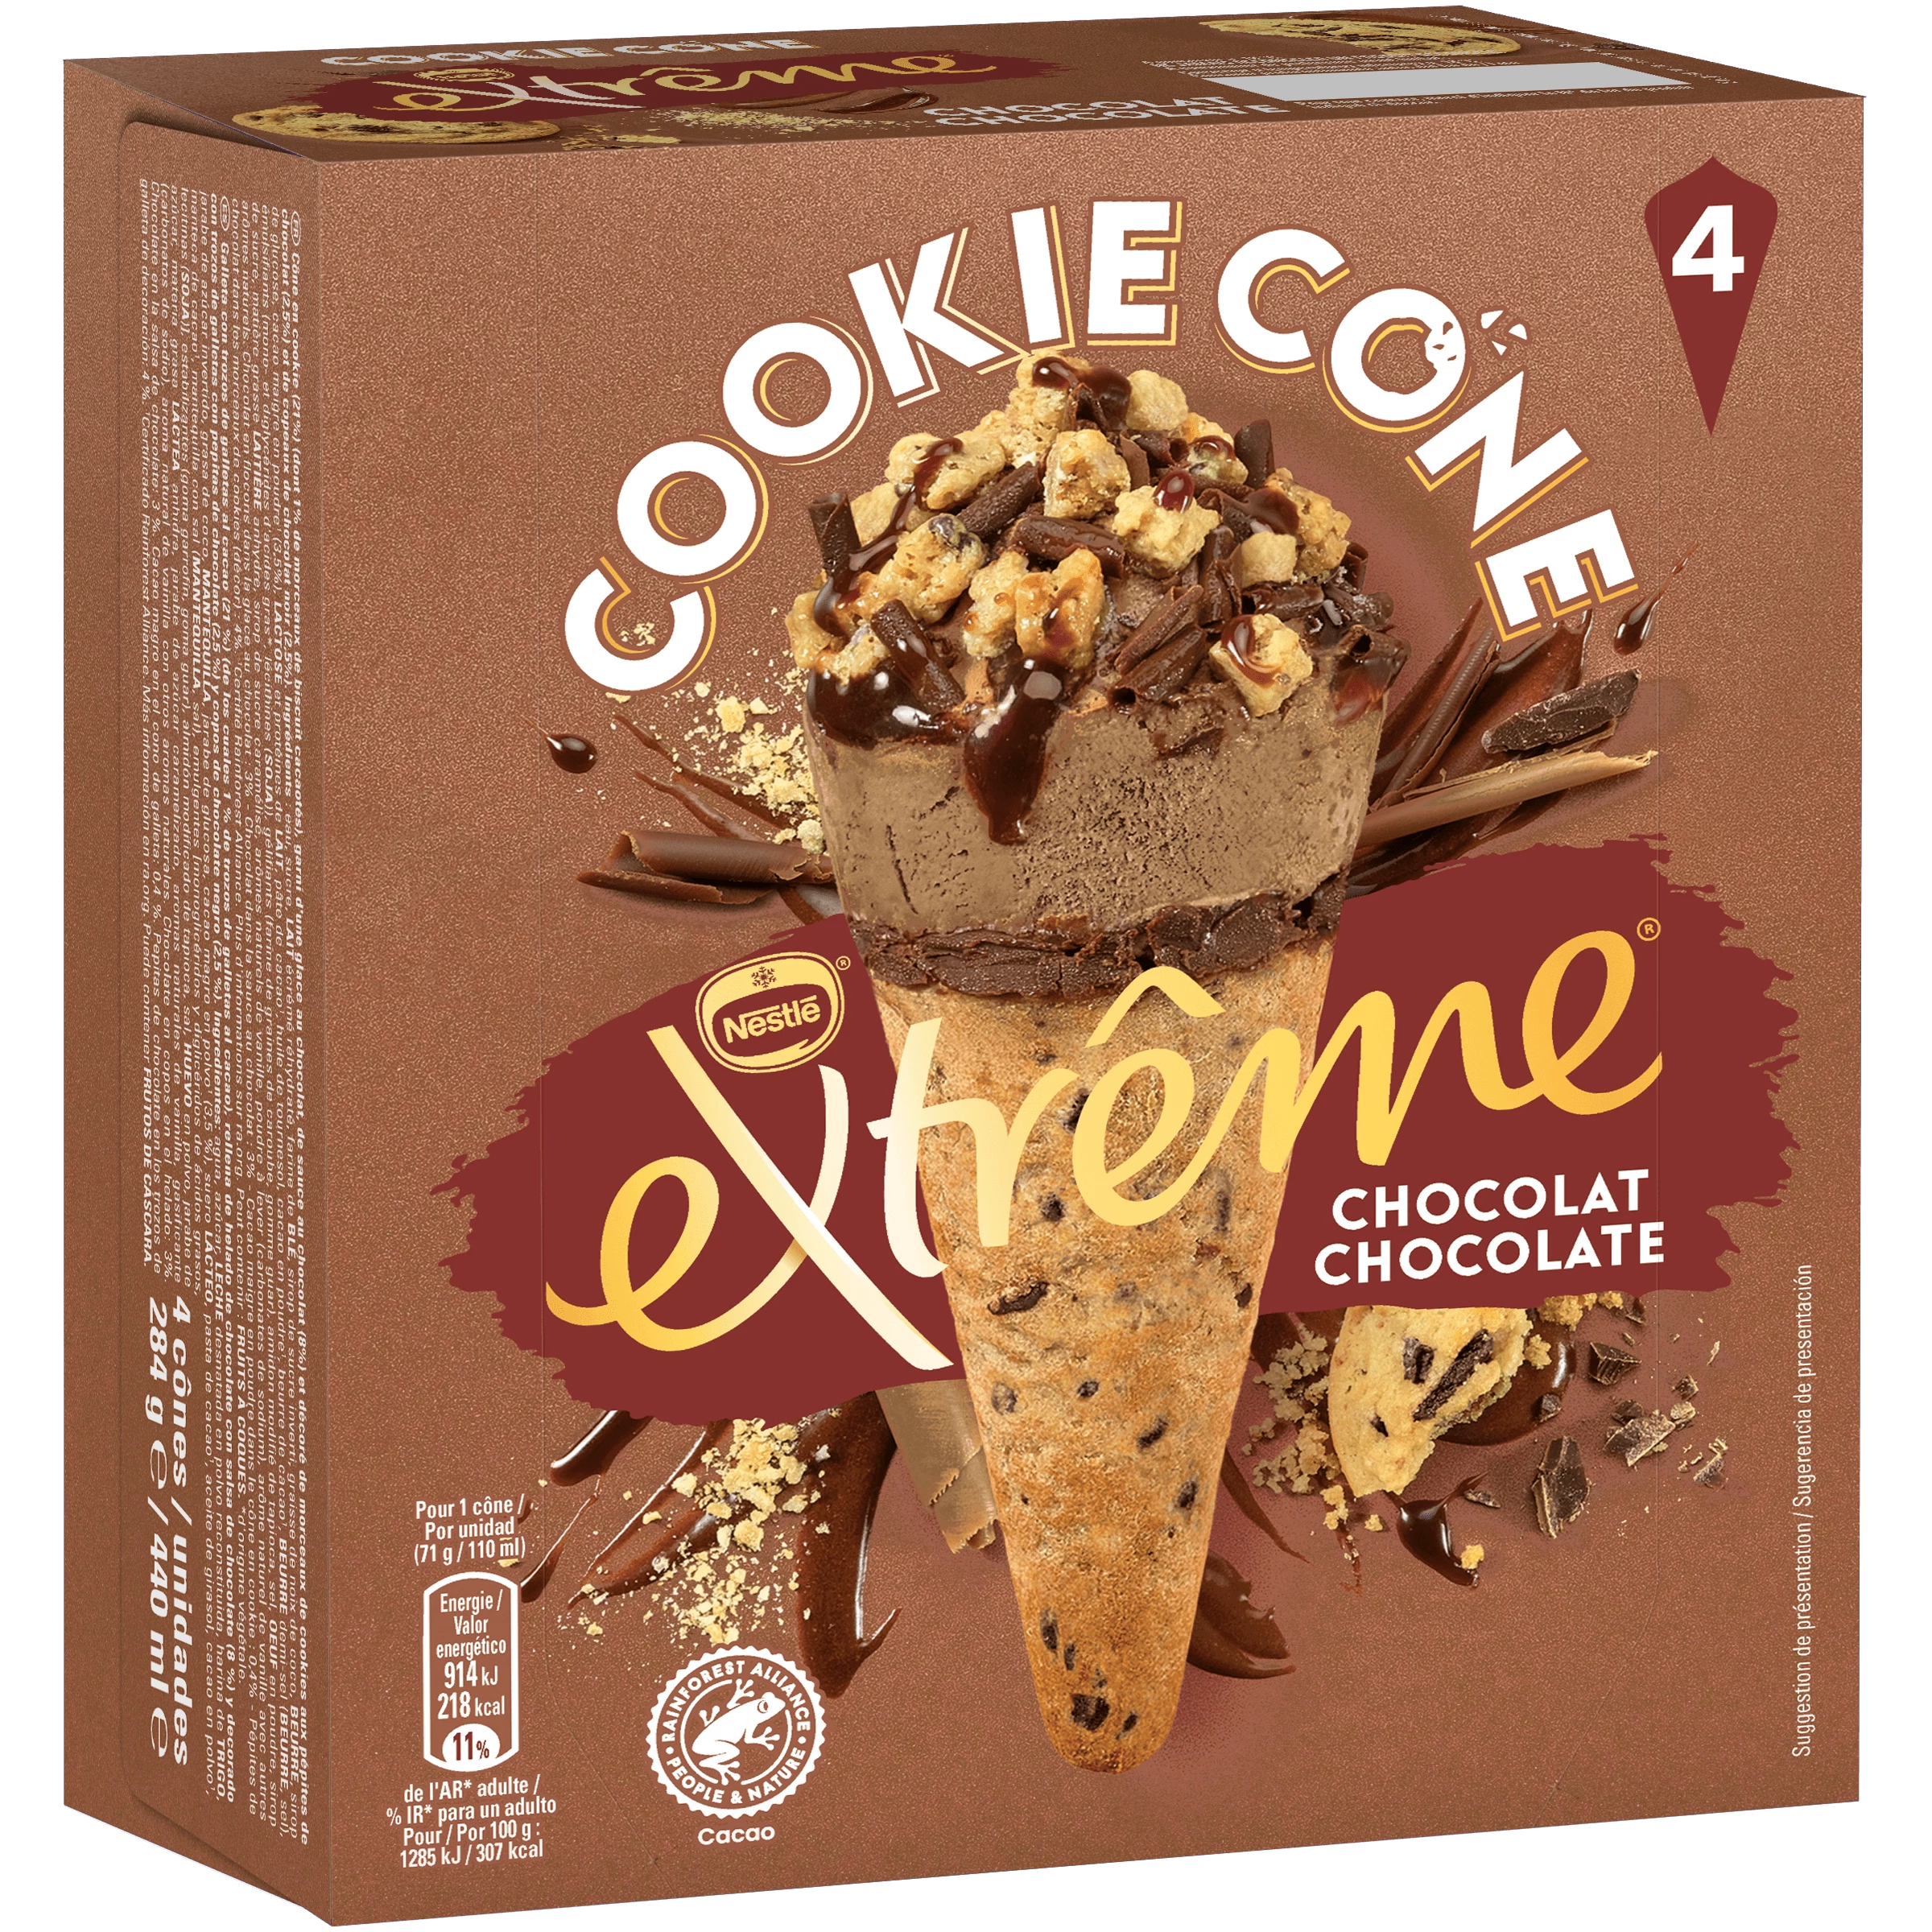 Ext Cookie Cone Choco X4 284g